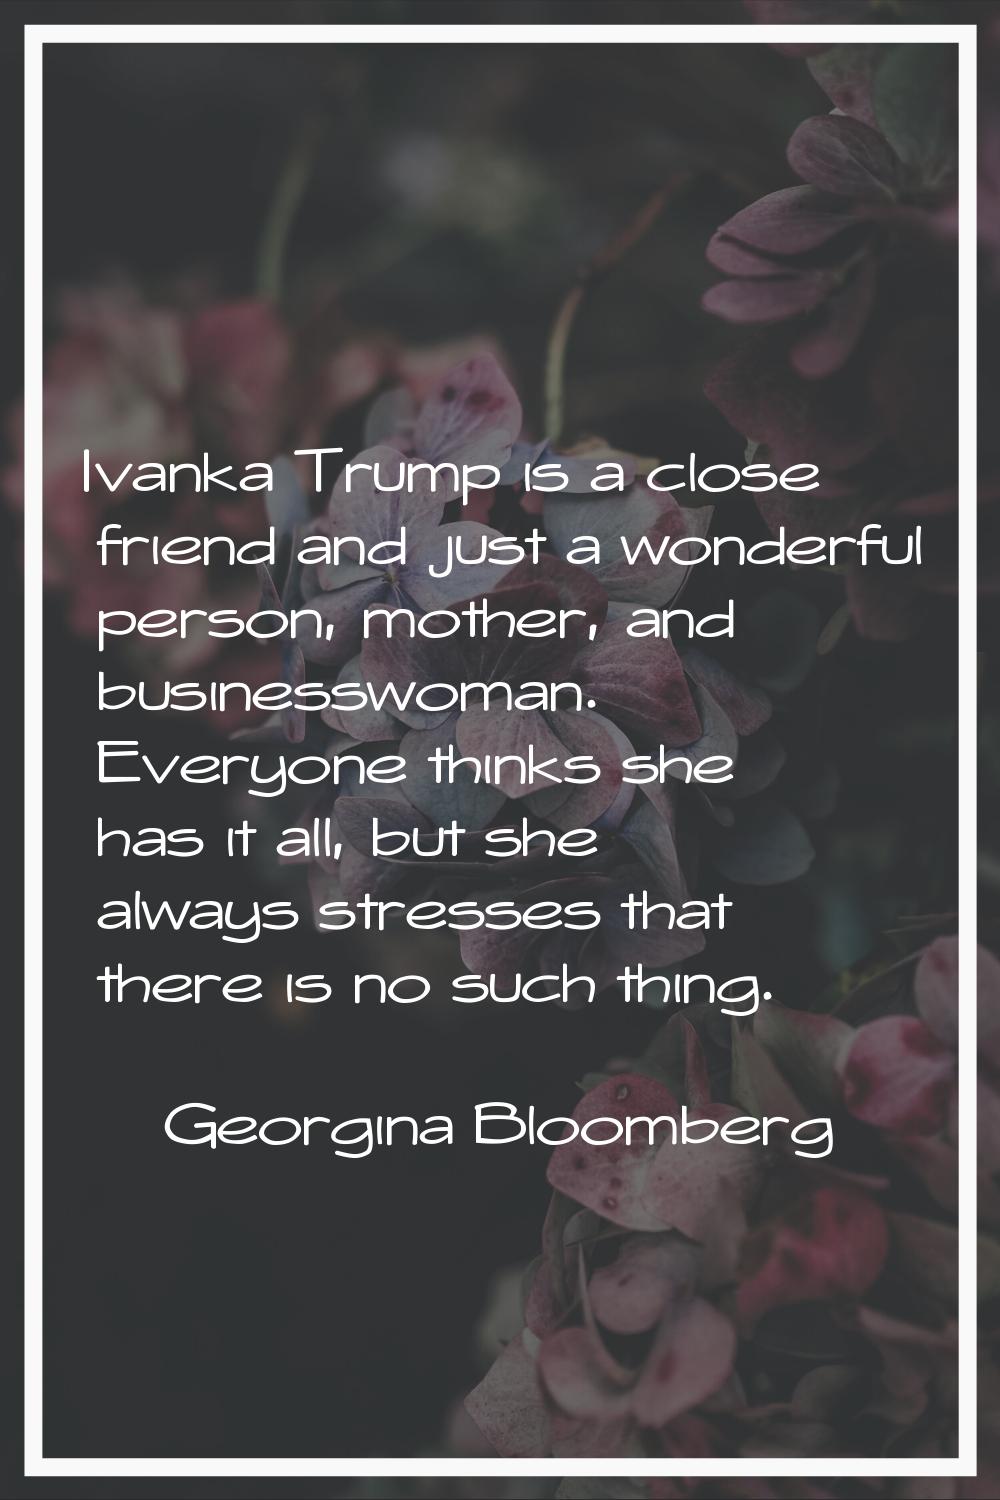 Ivanka Trump is a close friend and just a wonderful person, mother, and businesswoman. Everyone thi